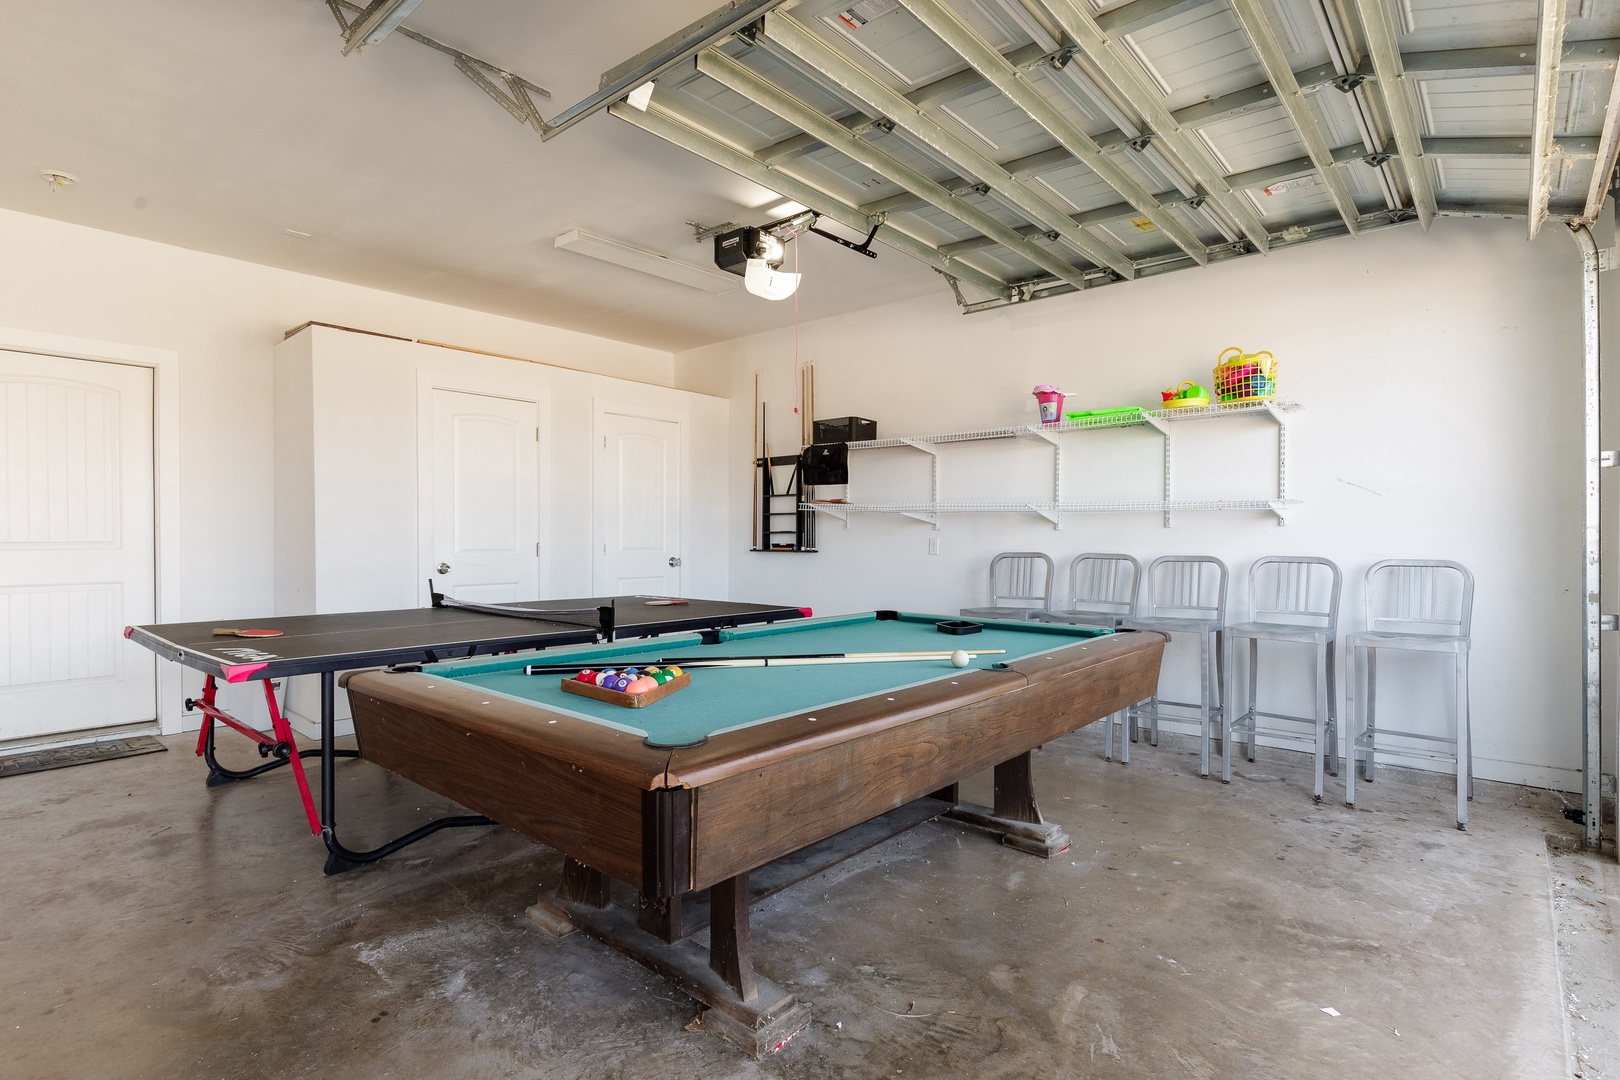 Pool Table and Table Tennis